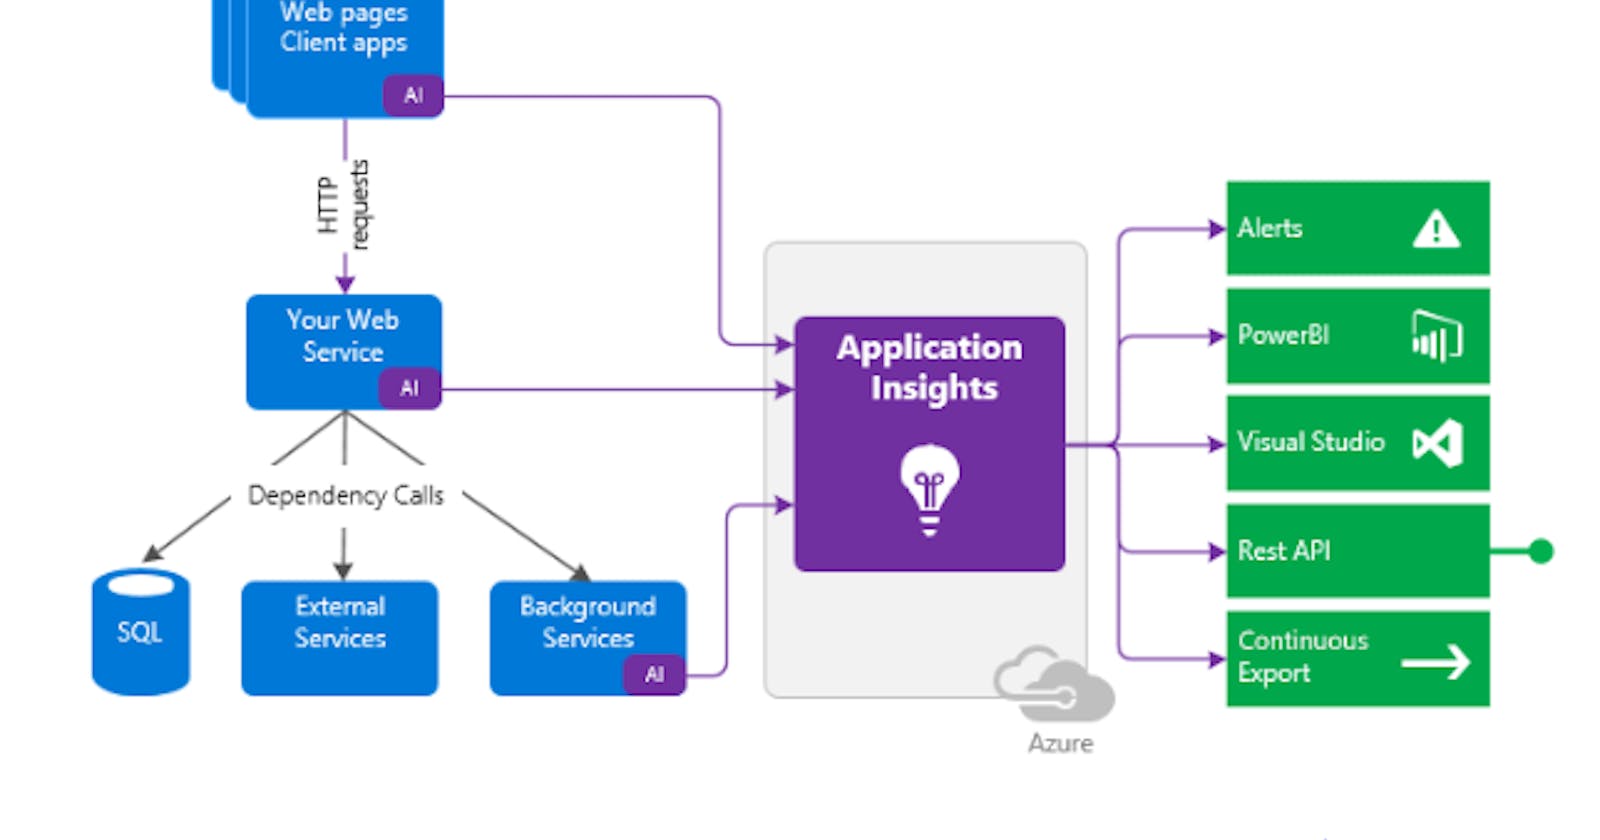 How to connect dotnet core application and App insights in Azure